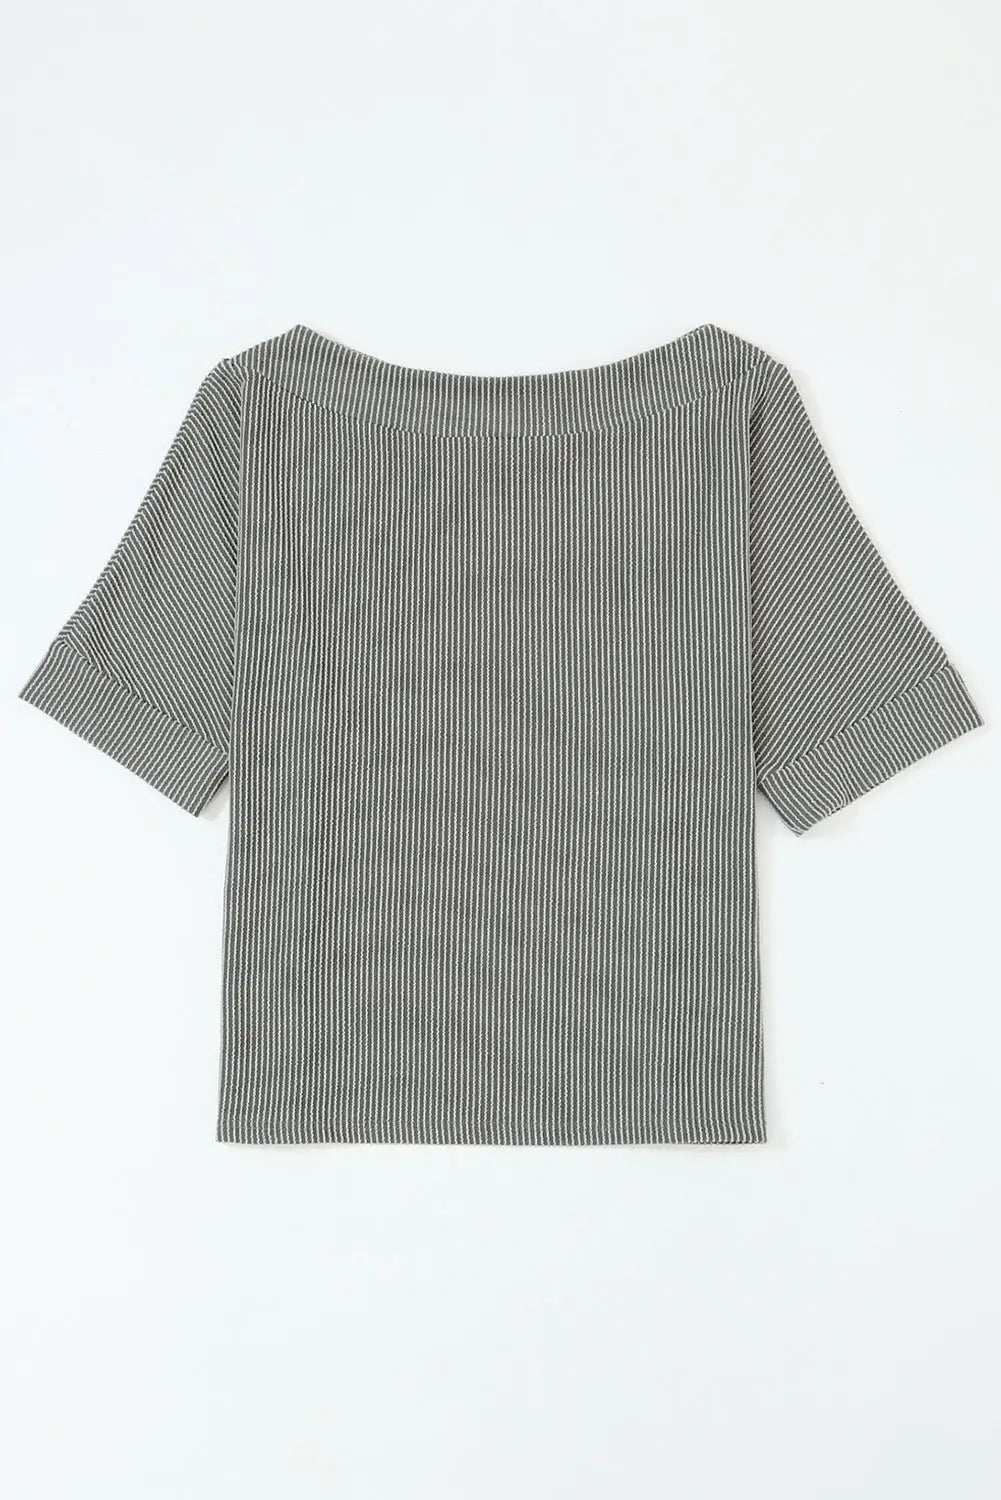 Gray boatneck batwing sleeve cording blouse - tops